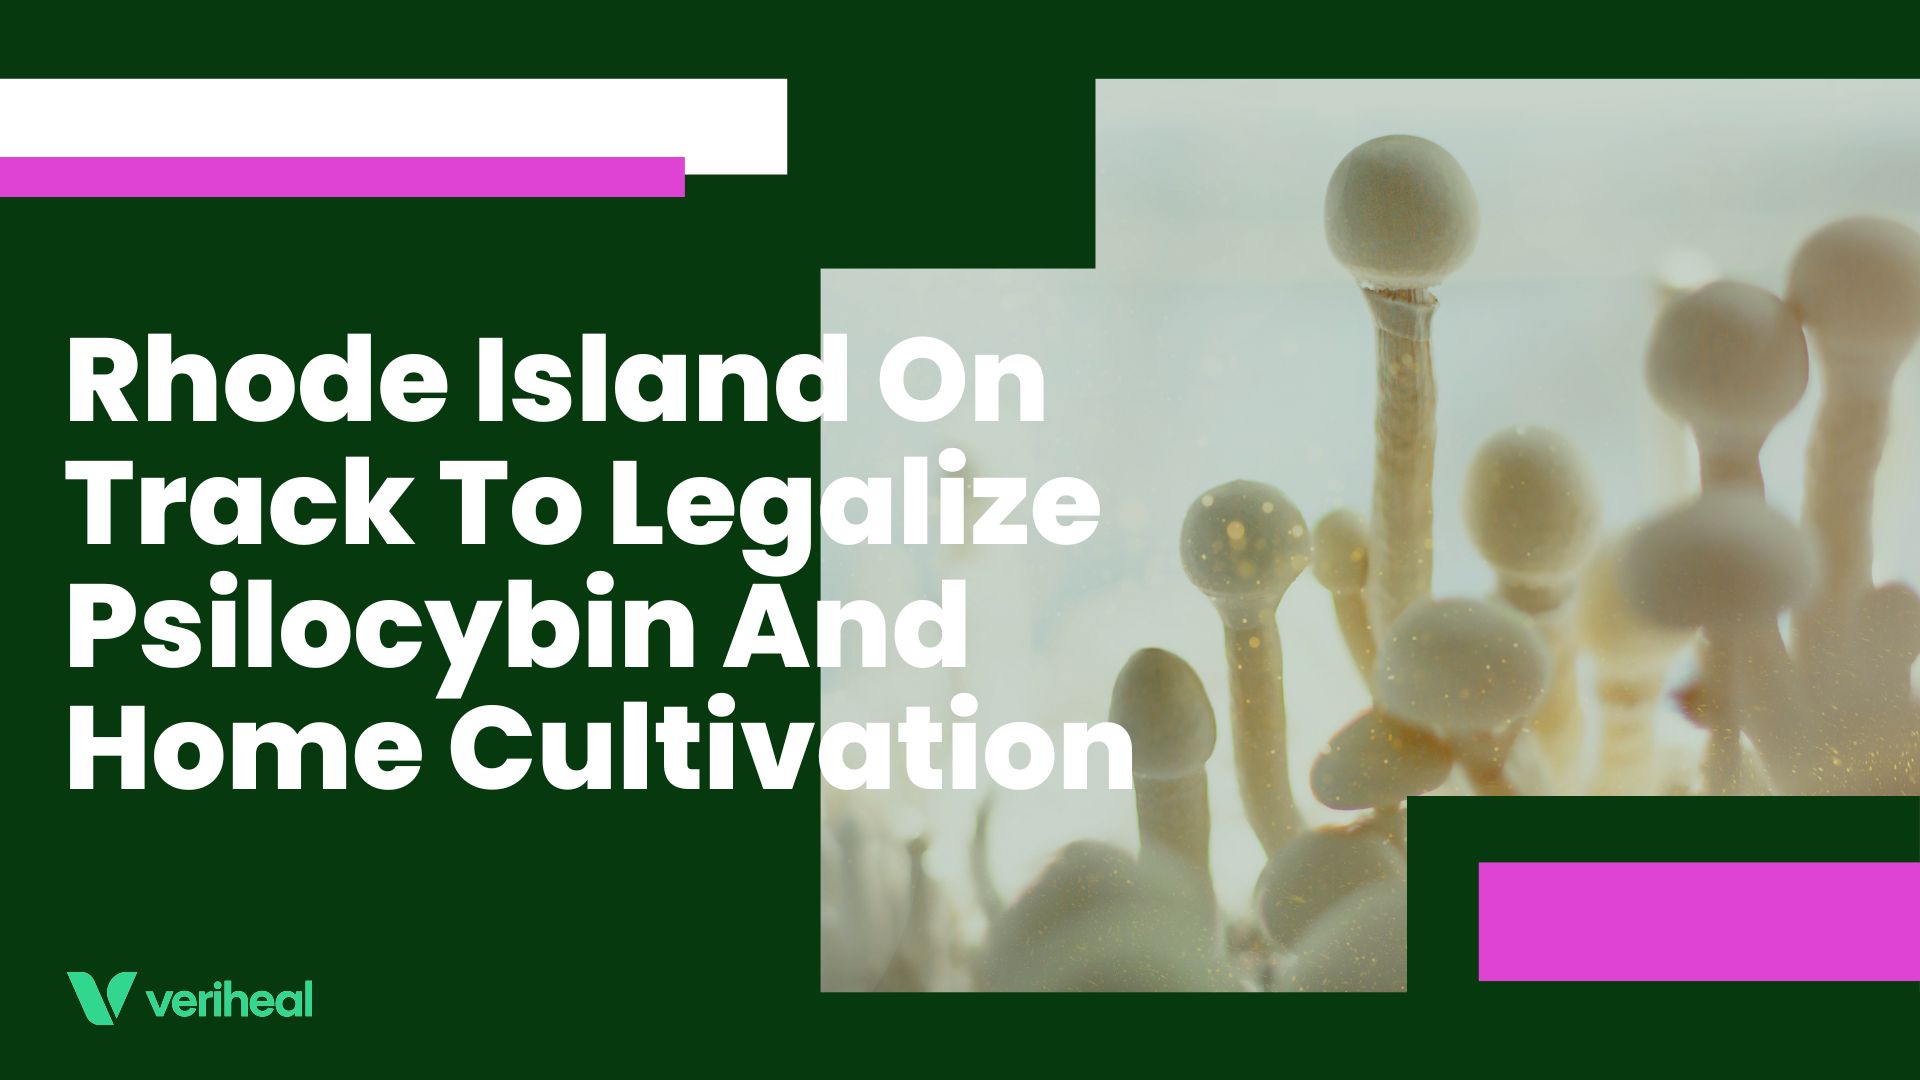 Rhode Island On Track To Legalize Psilocybin And Home Cultivation